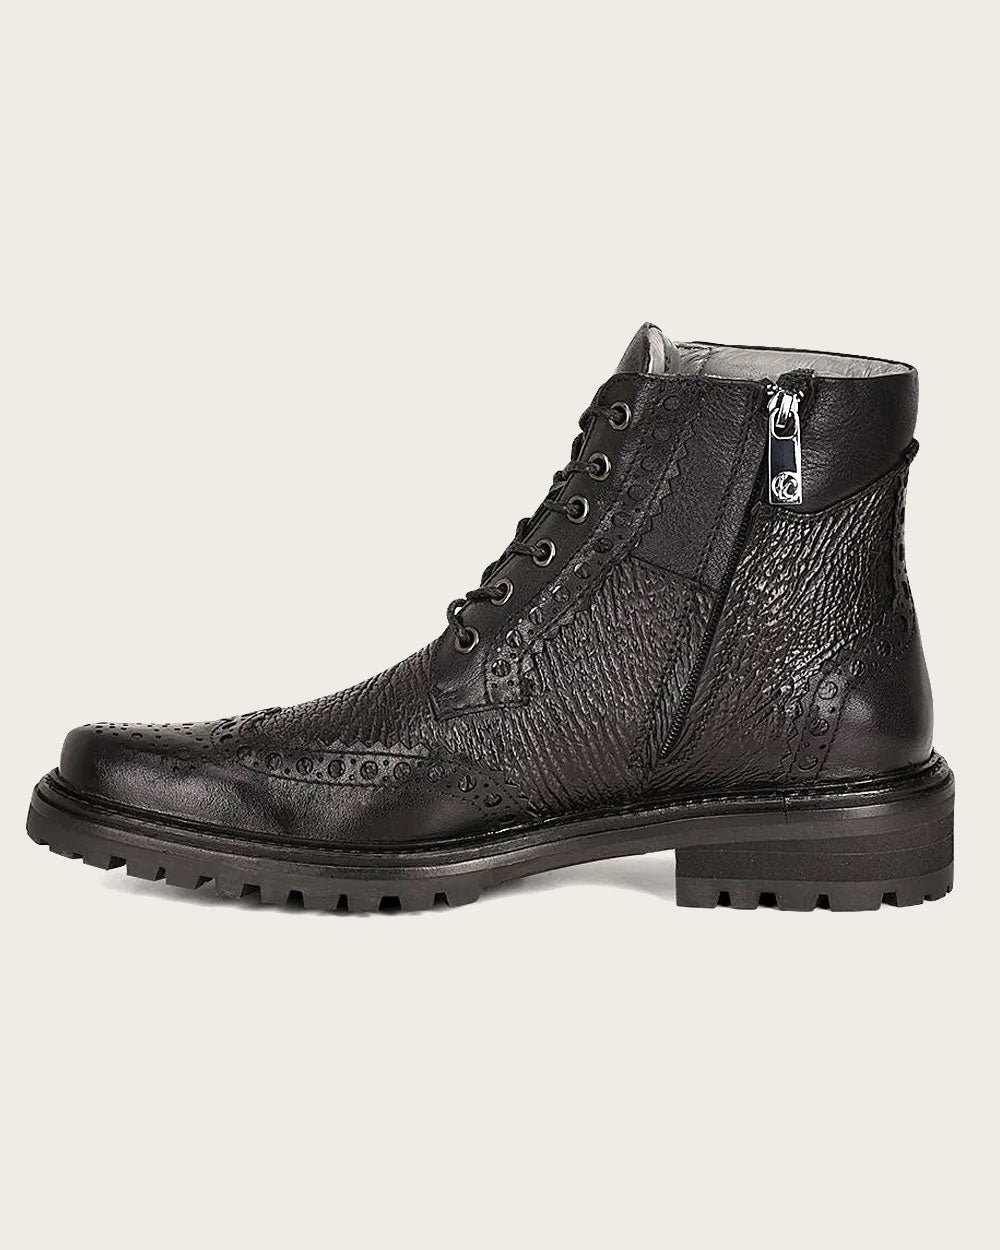 Luxury Meets Style: Cuadra's hand-painted black shark leather ankle boots.